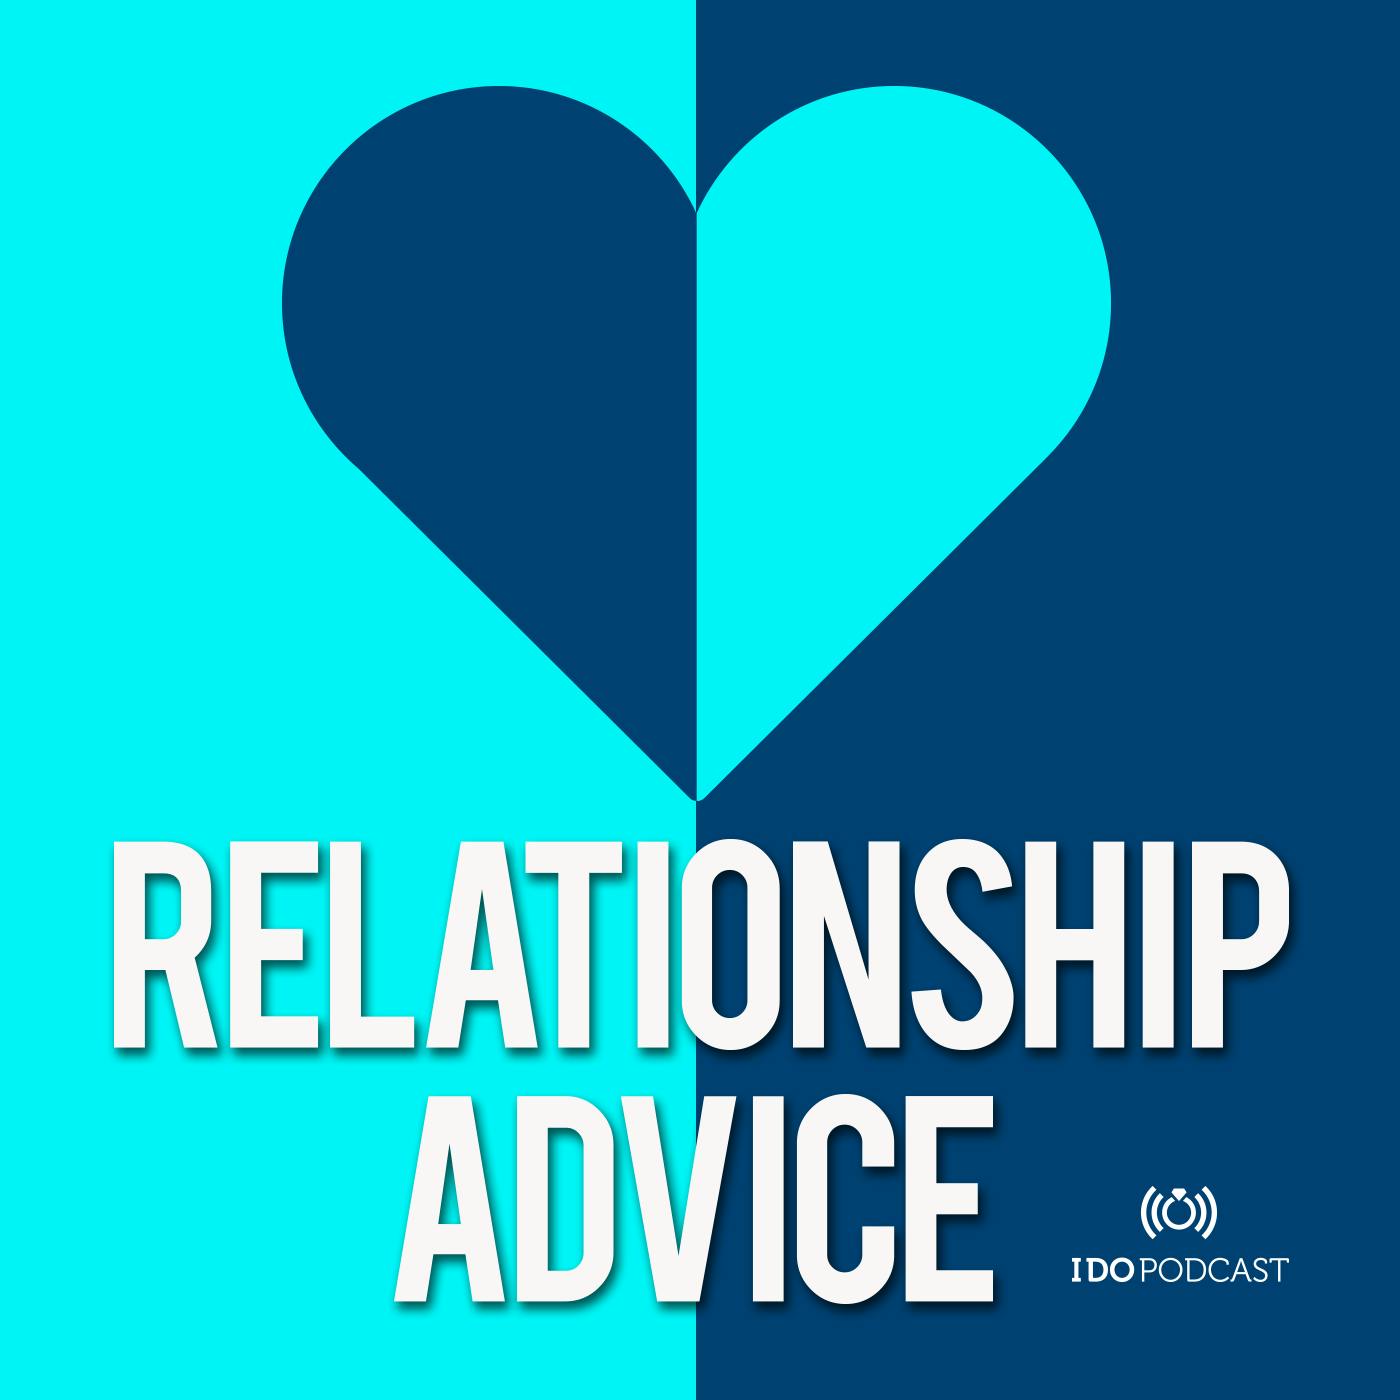 300: Dealing With Intimacy Problems In Your Relationship